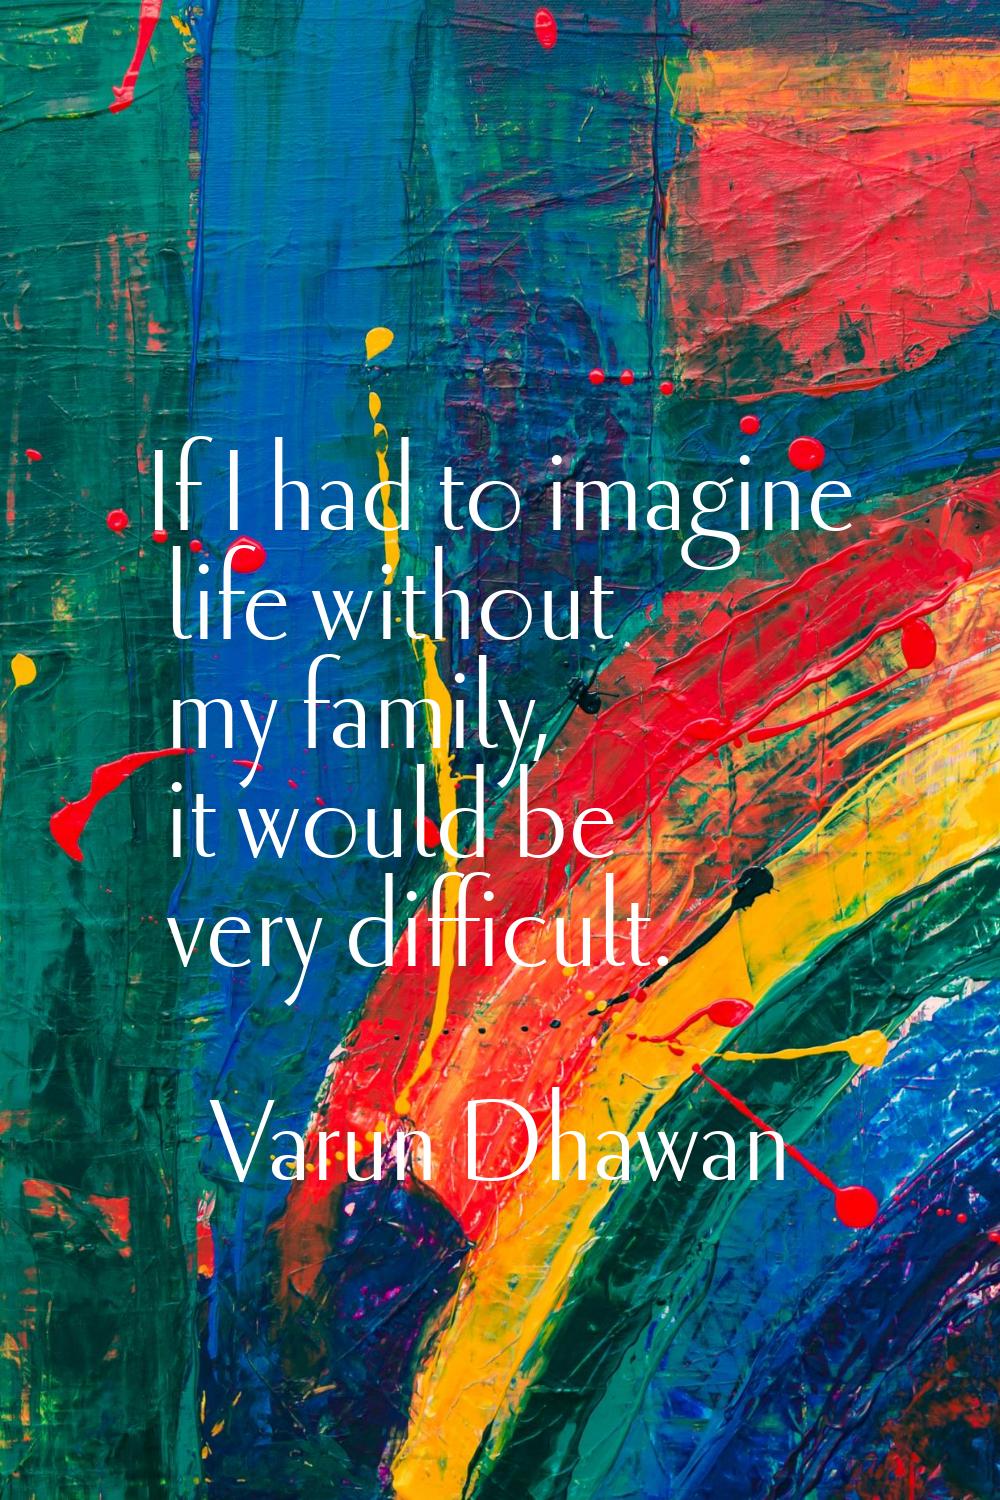 If I had to imagine life without my family, it would be very difficult.